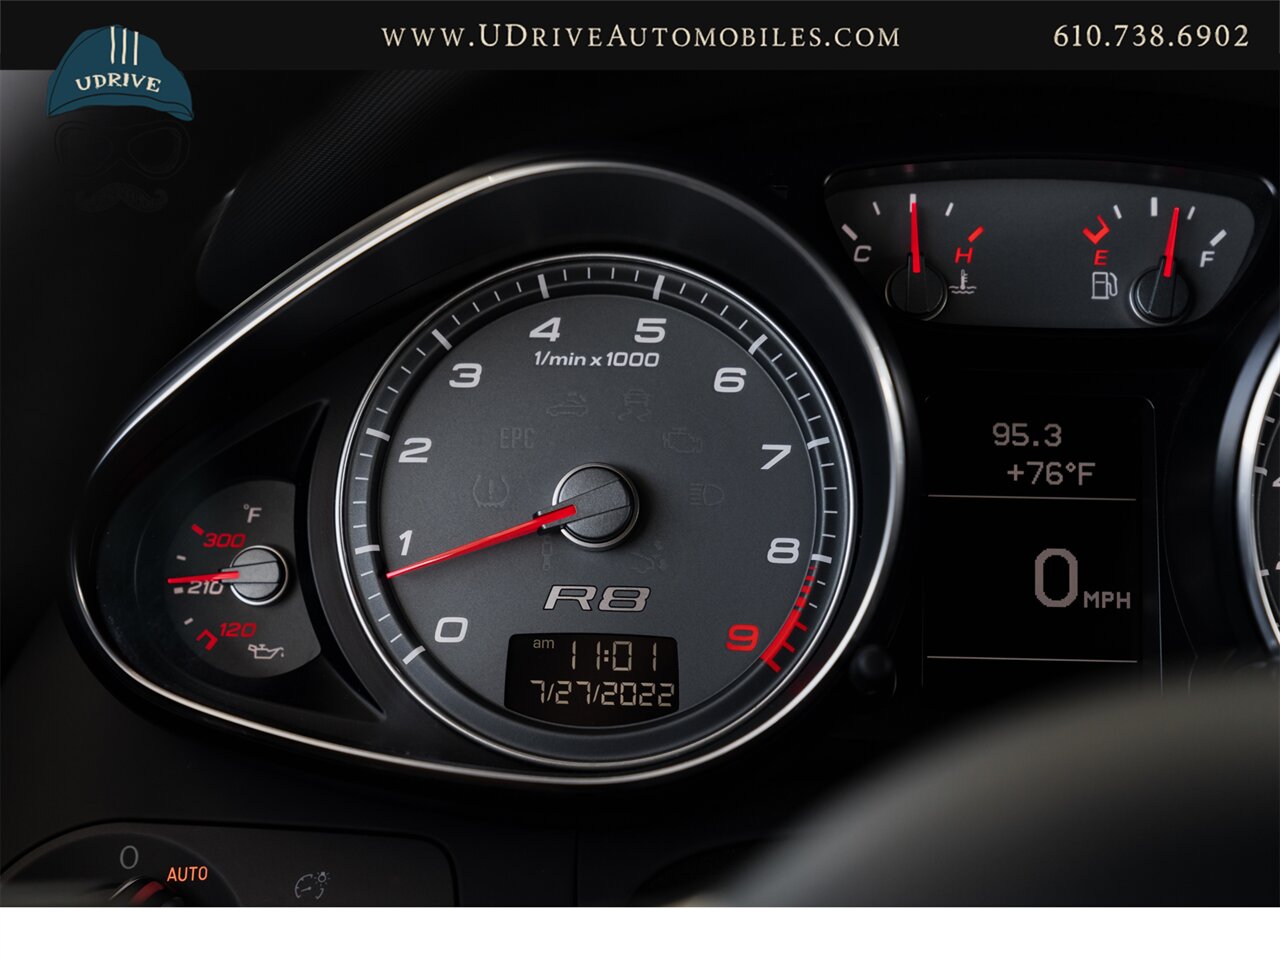 2012 Audi R8 4.2 Quattro  6 Speed Manual 1 Owner Service History - Photo 36 - West Chester, PA 19382